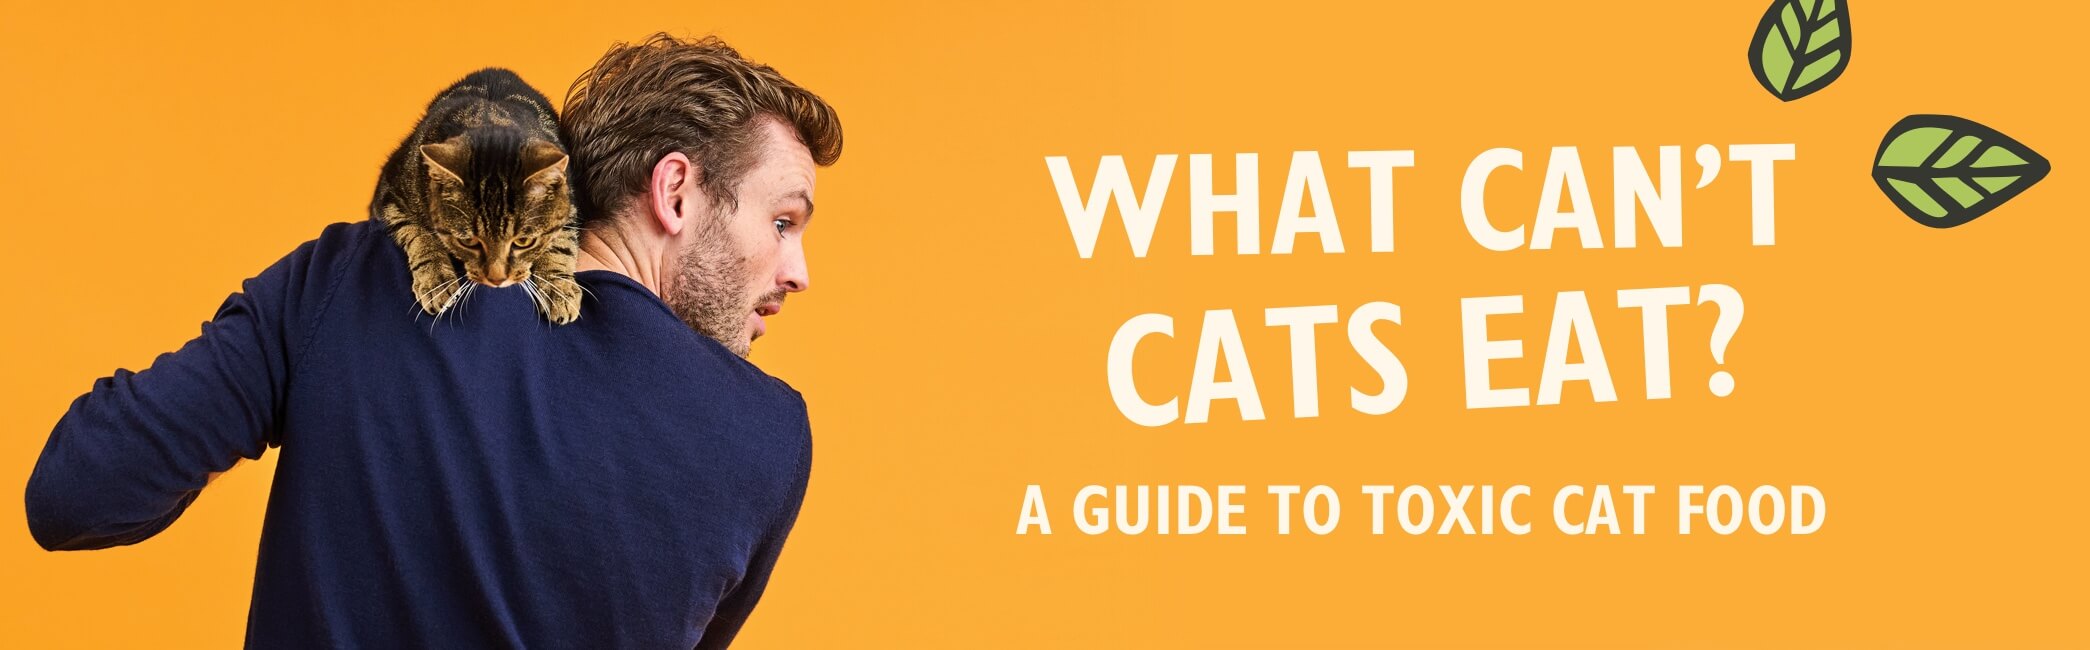 What can't cats eat? A guide to toxic cat foods with Rory the Vet